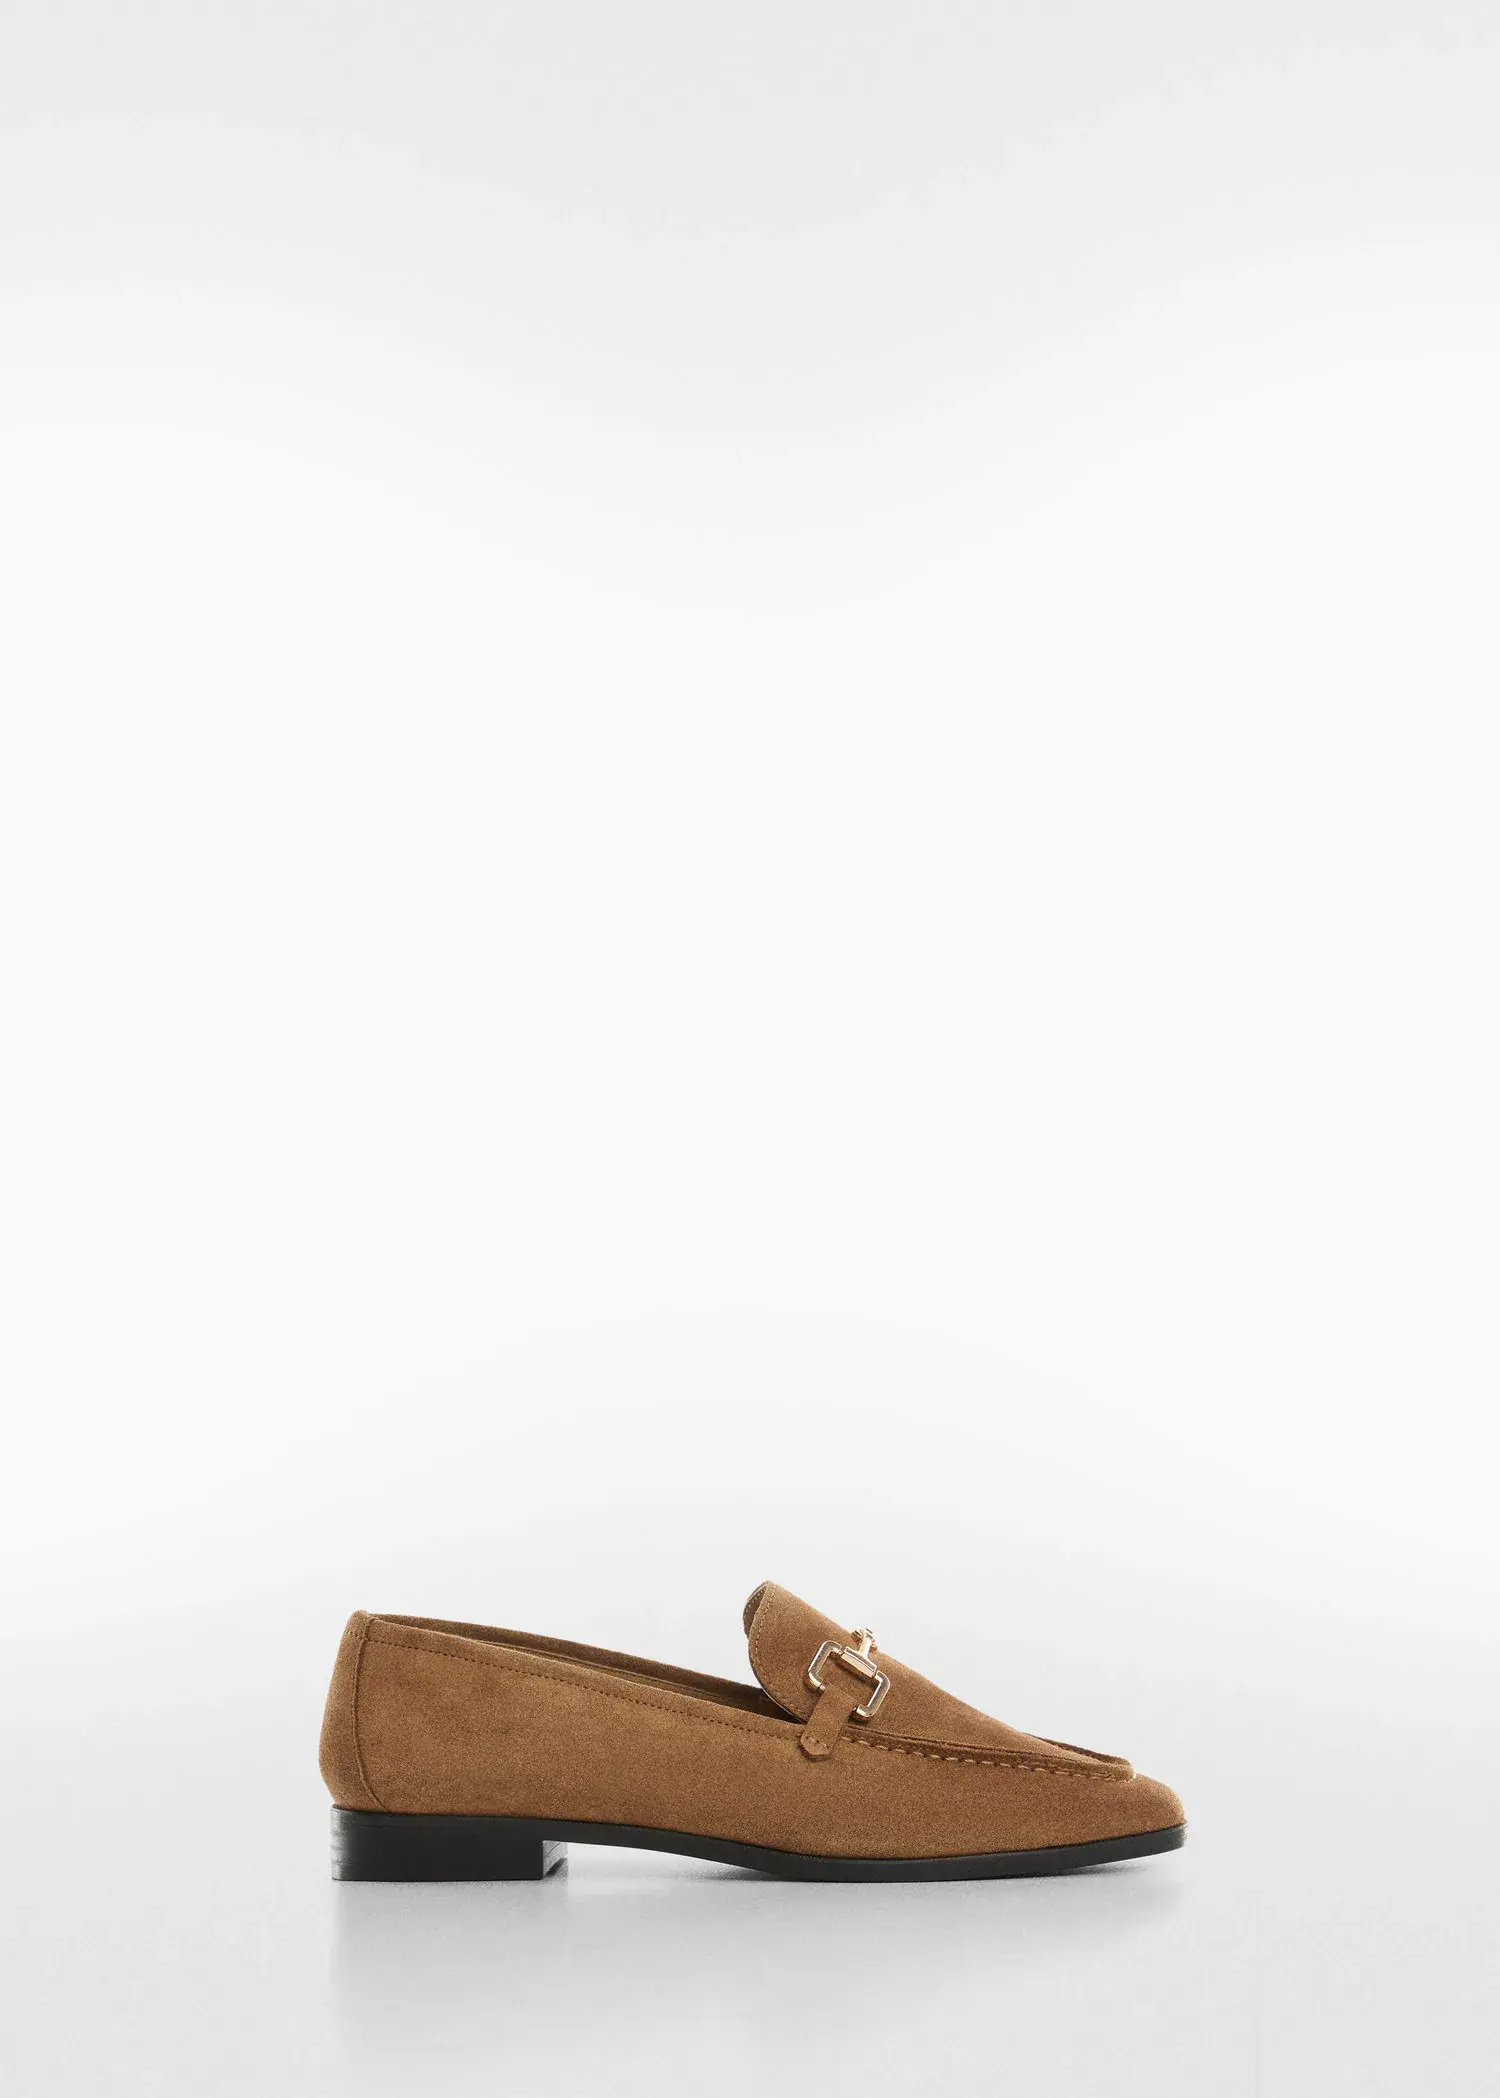 Mango Suede leather moccasin. 3